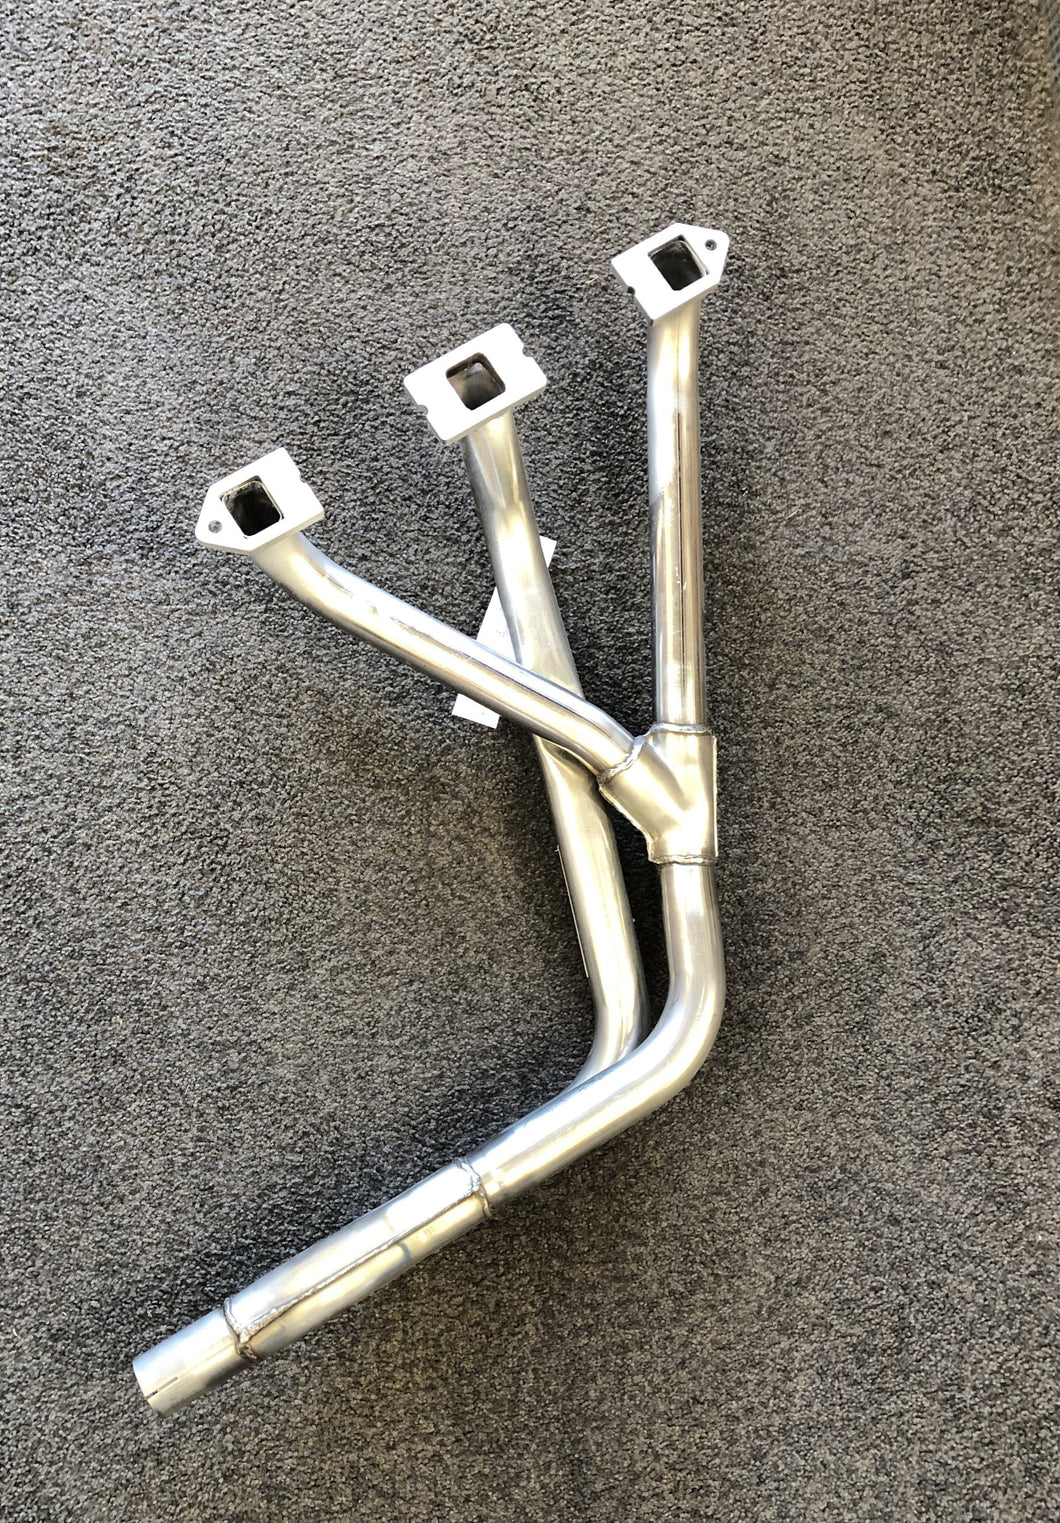 MGB-MG319 Stainless Steel Performance header 1962-1980